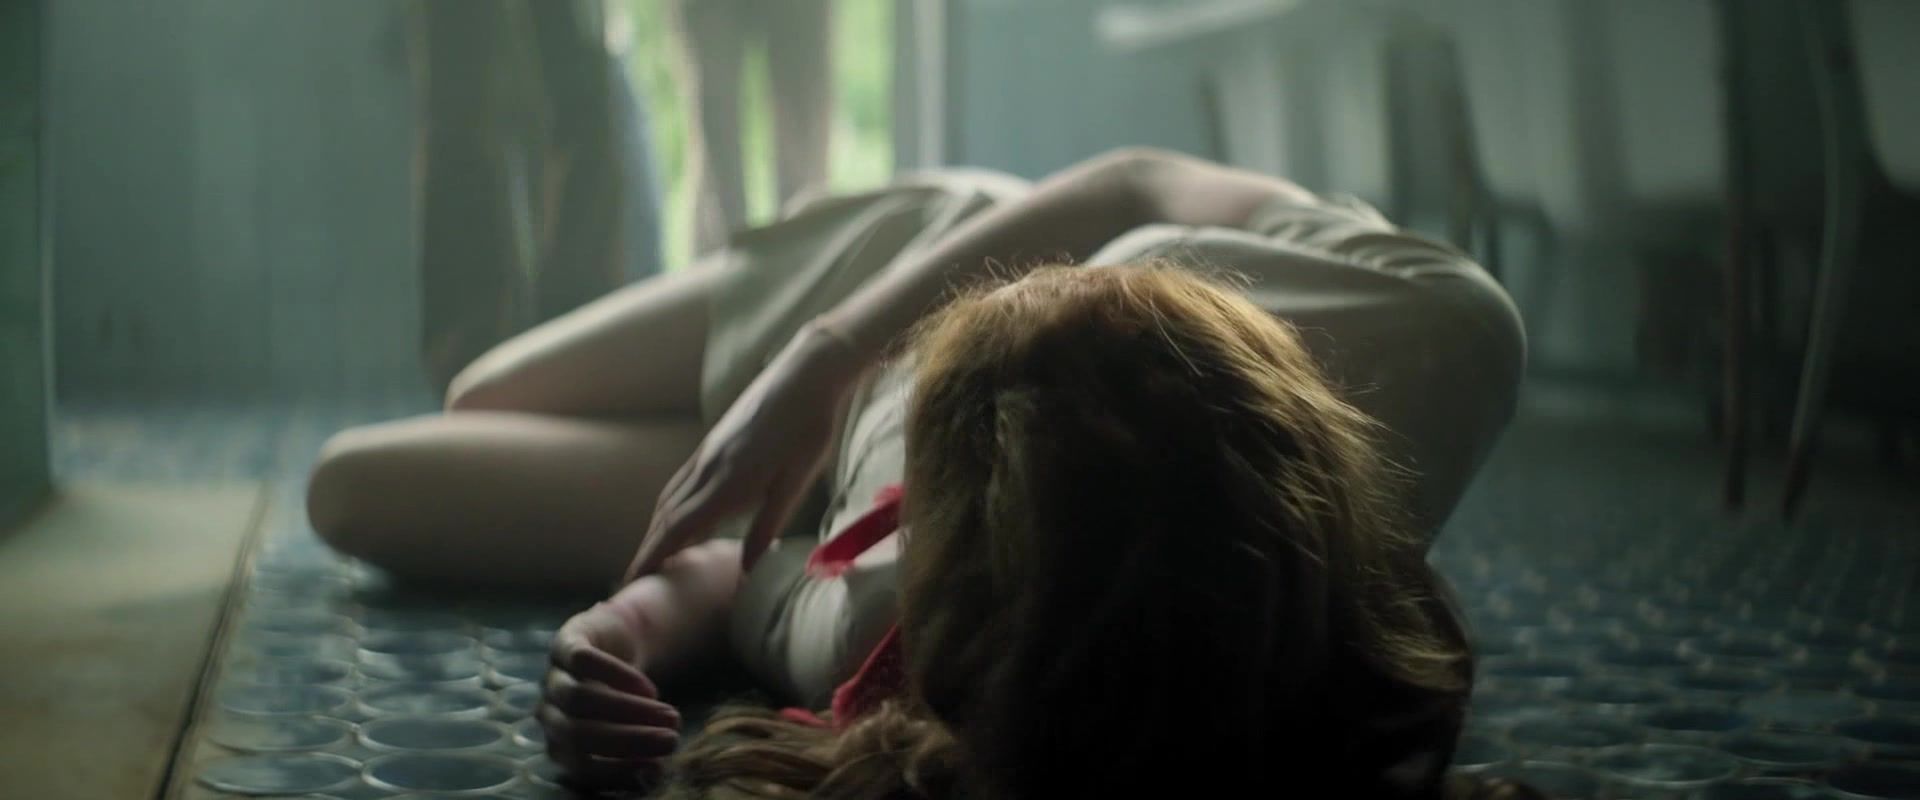 VideosZ Naked Freya Mavor, Stacy Martin - The Lady In The Car With Glasses & A Gun (2015) (Sex, Topless Scenes) Madura